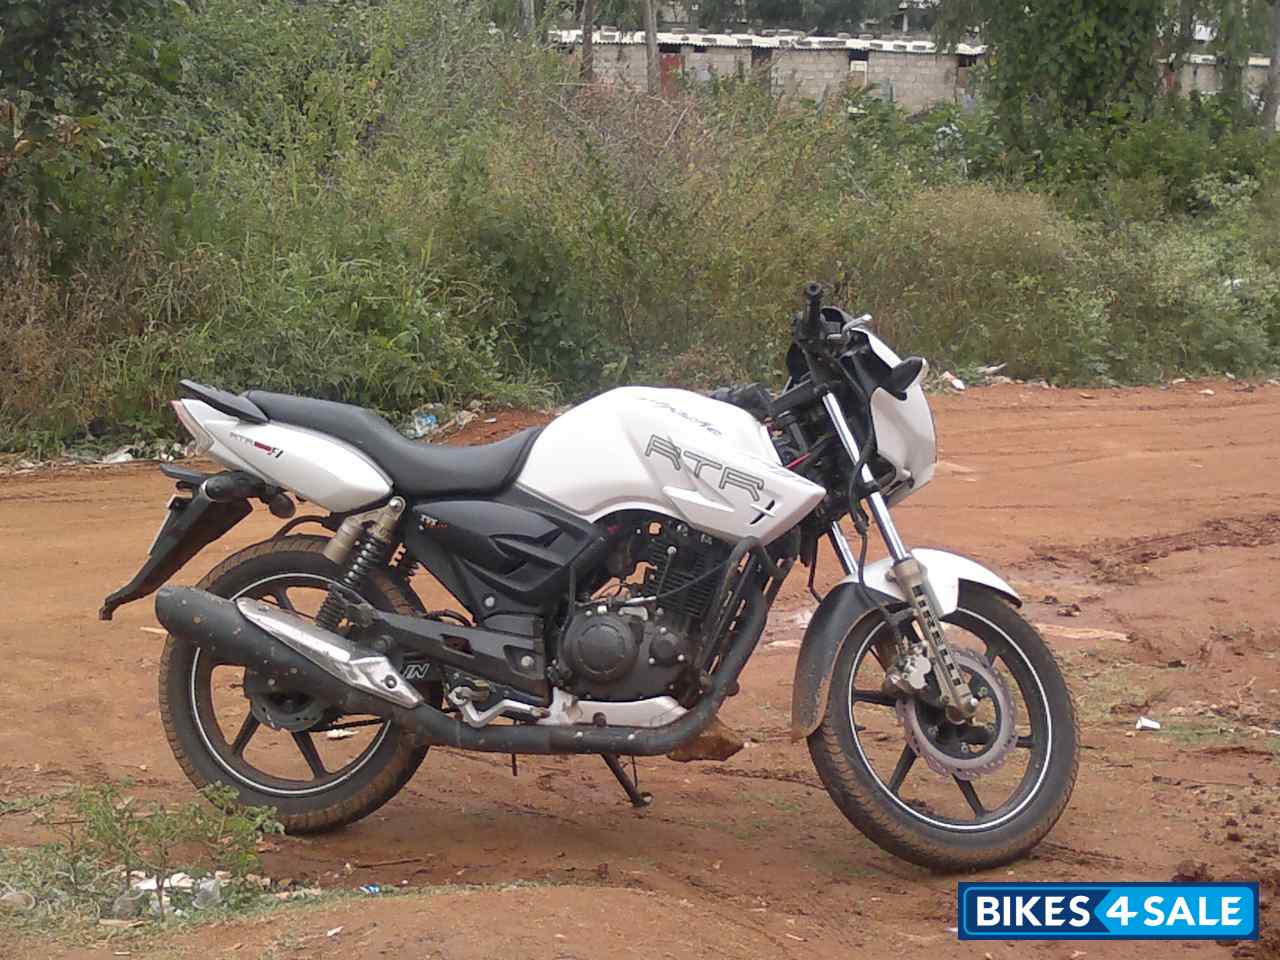 Used 2010 model TVS Apache RTR 180 for sale in Bangalore ...